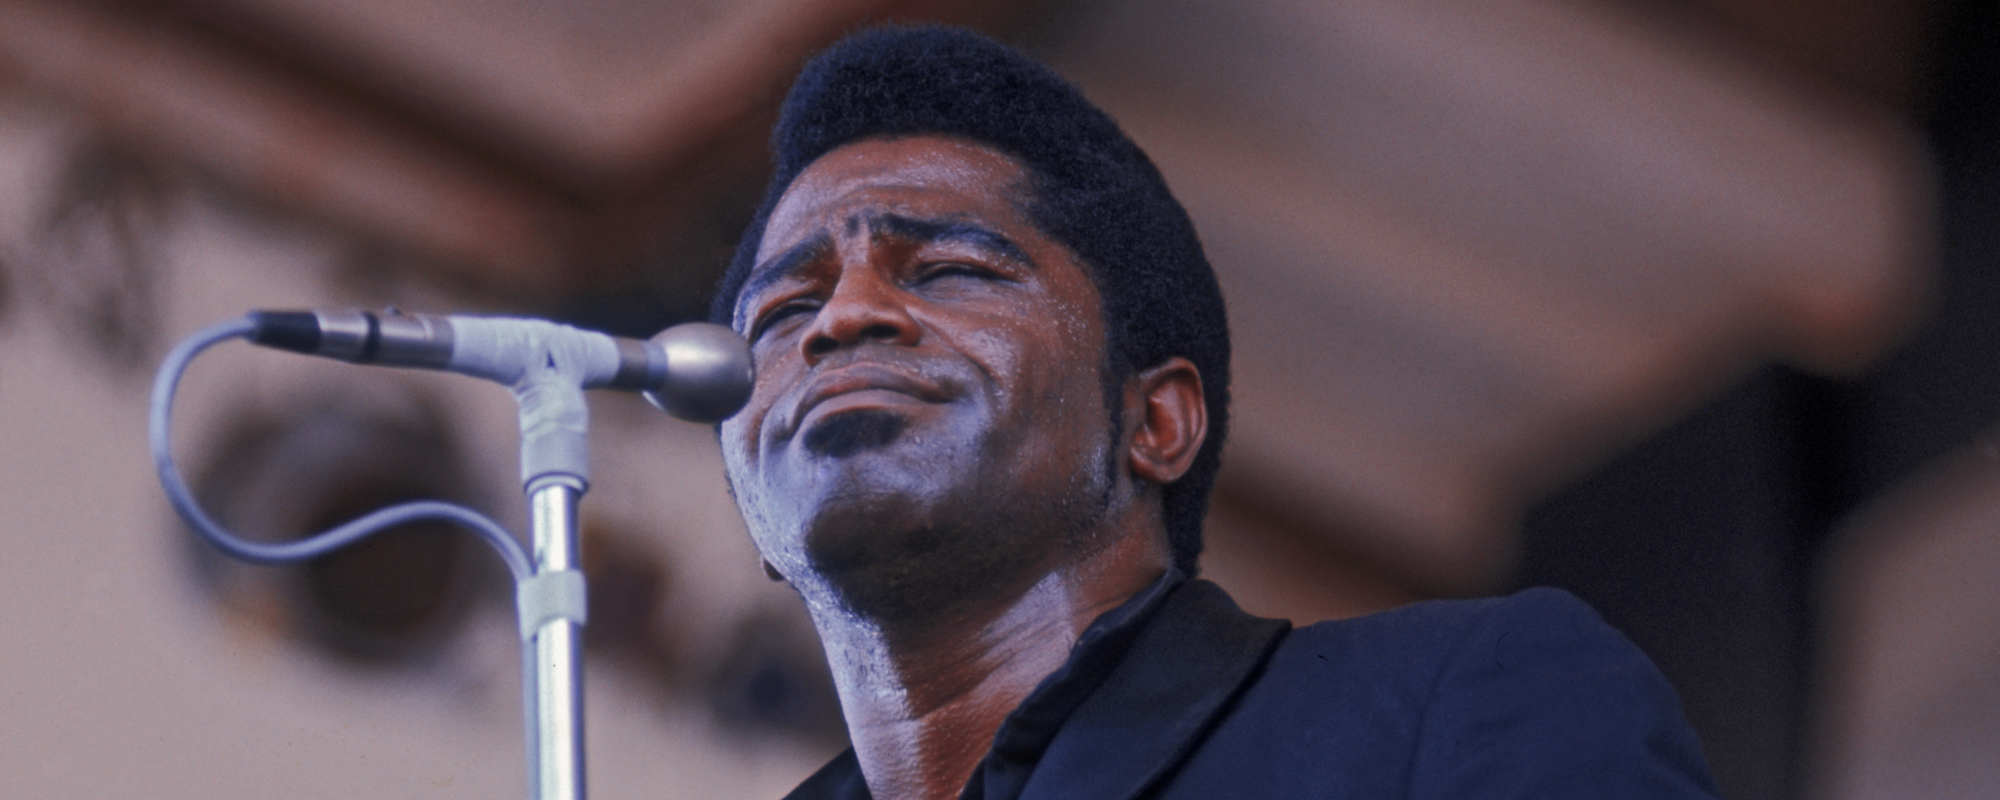 Previously Unheard James Brown Song “We Got to Change” Released